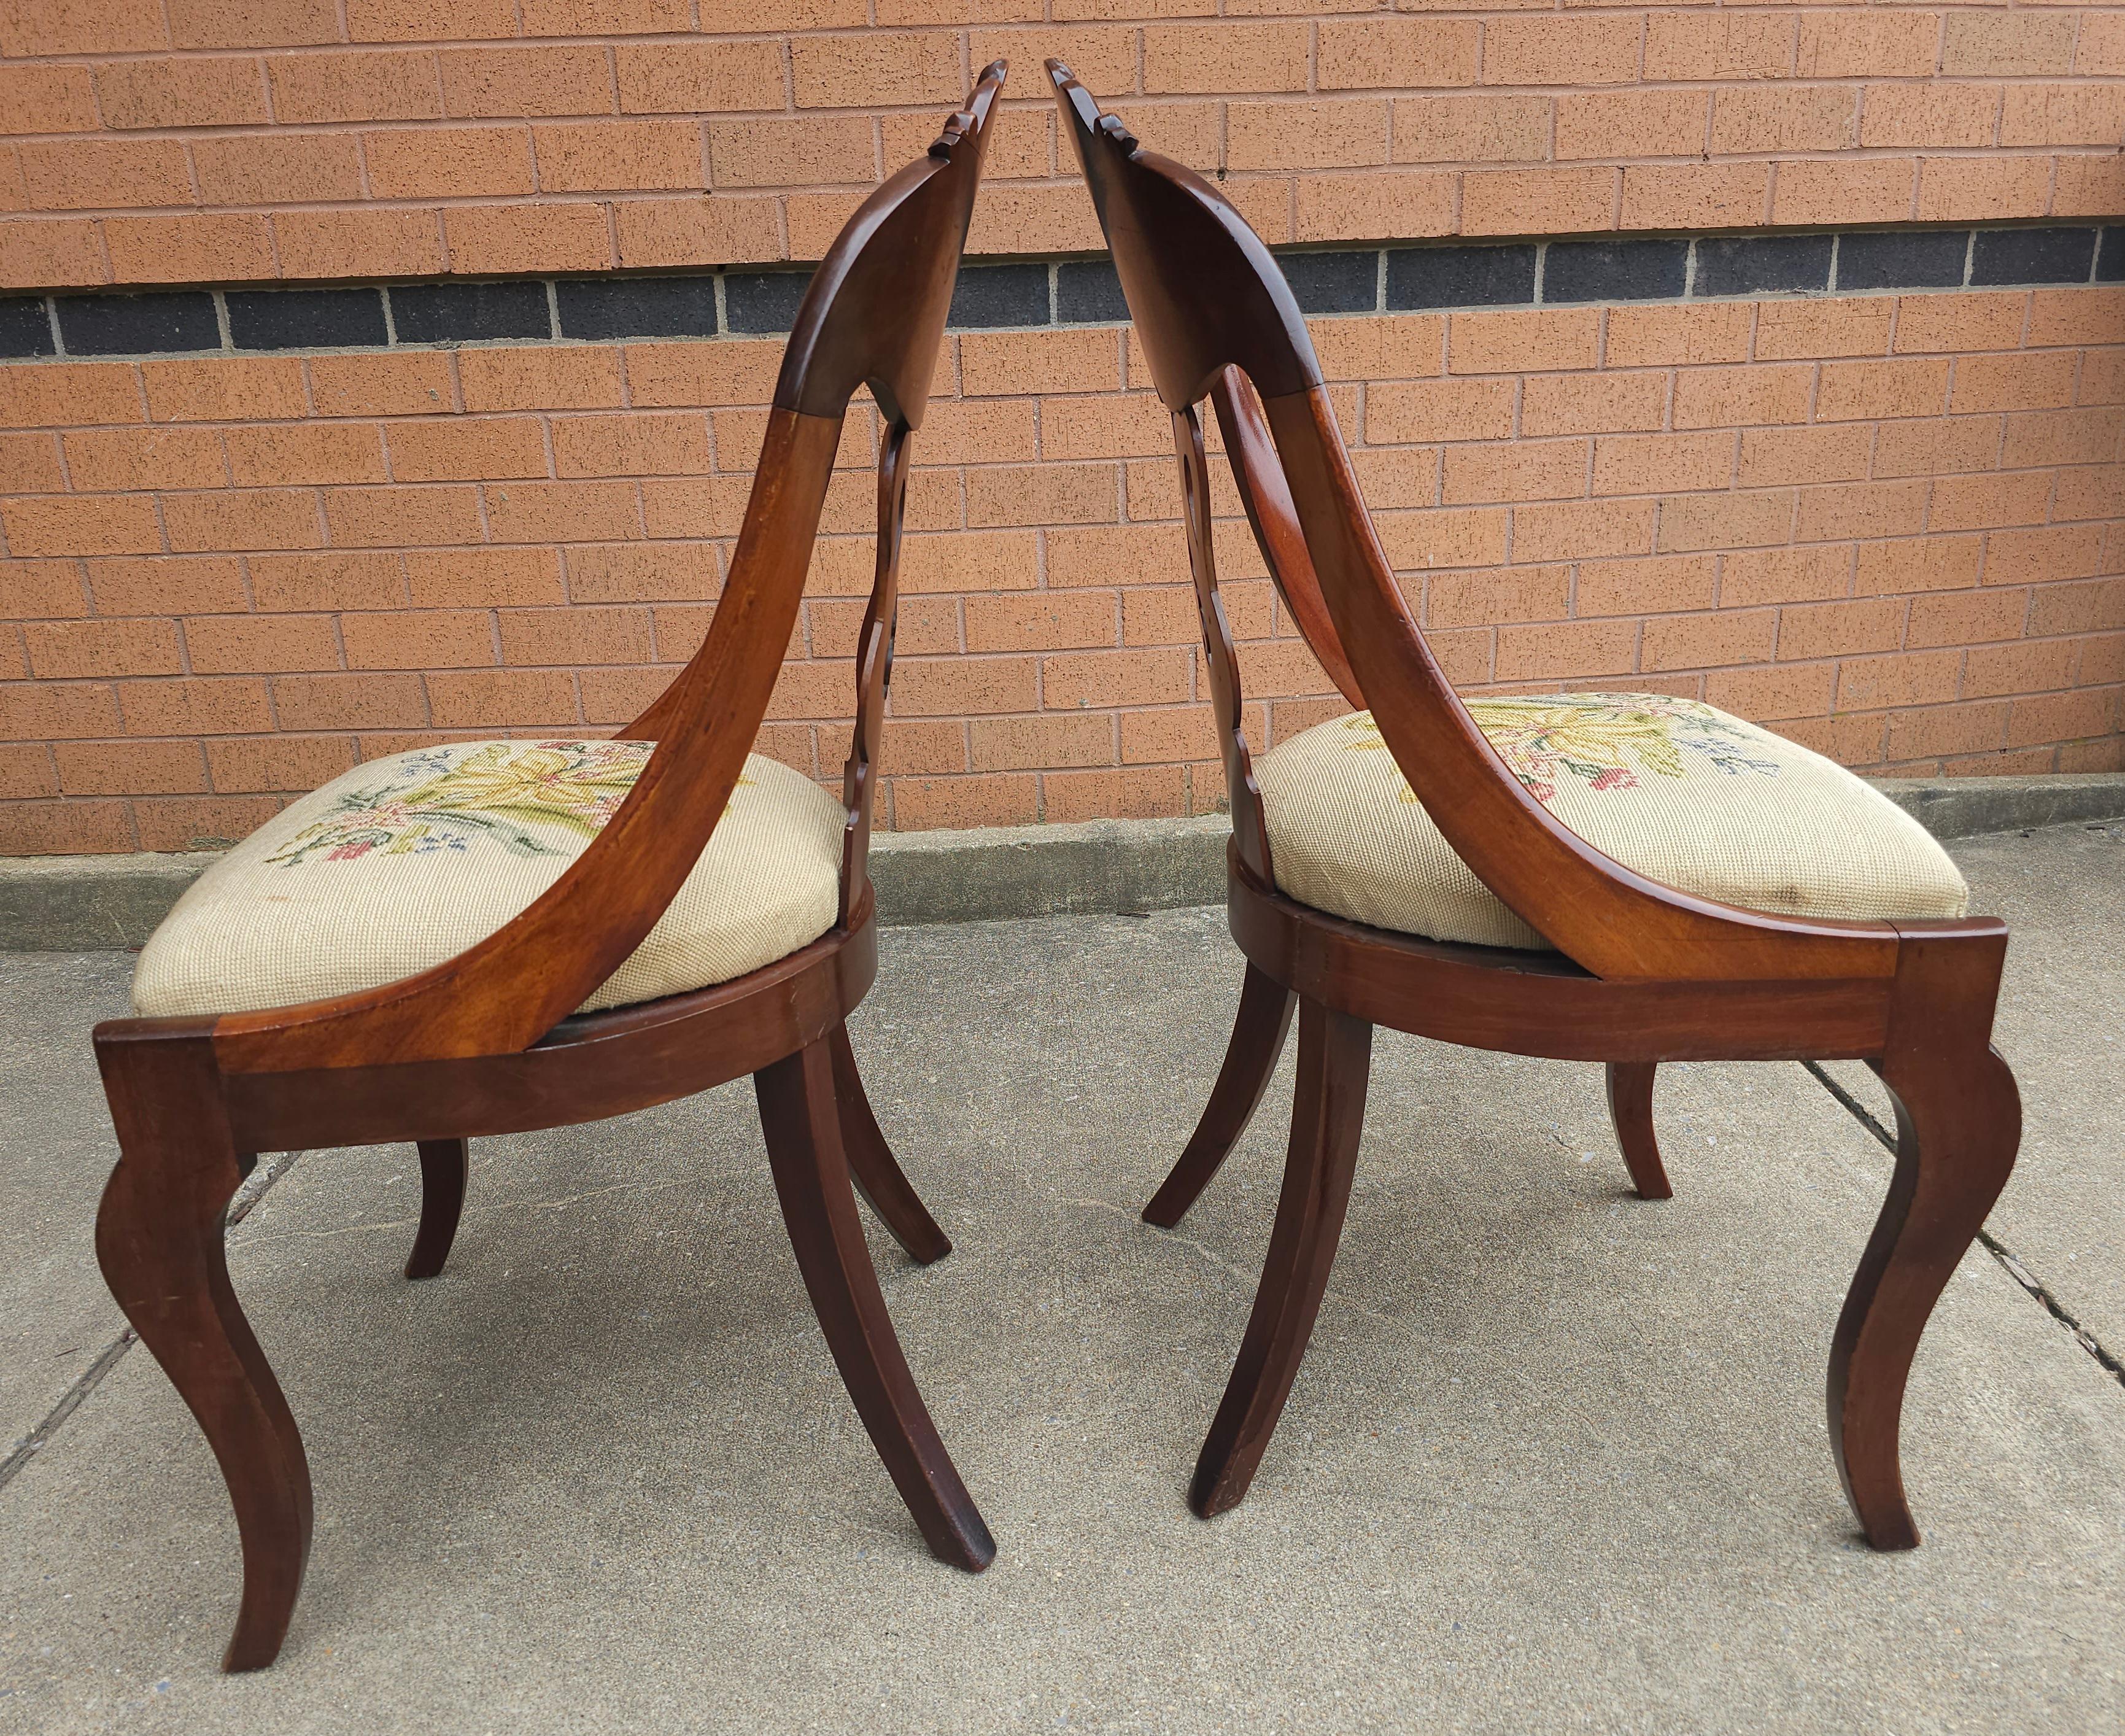 Pair 19th Century American Empire Carved Magogany and Upholstered Chairs. Measure 18.25